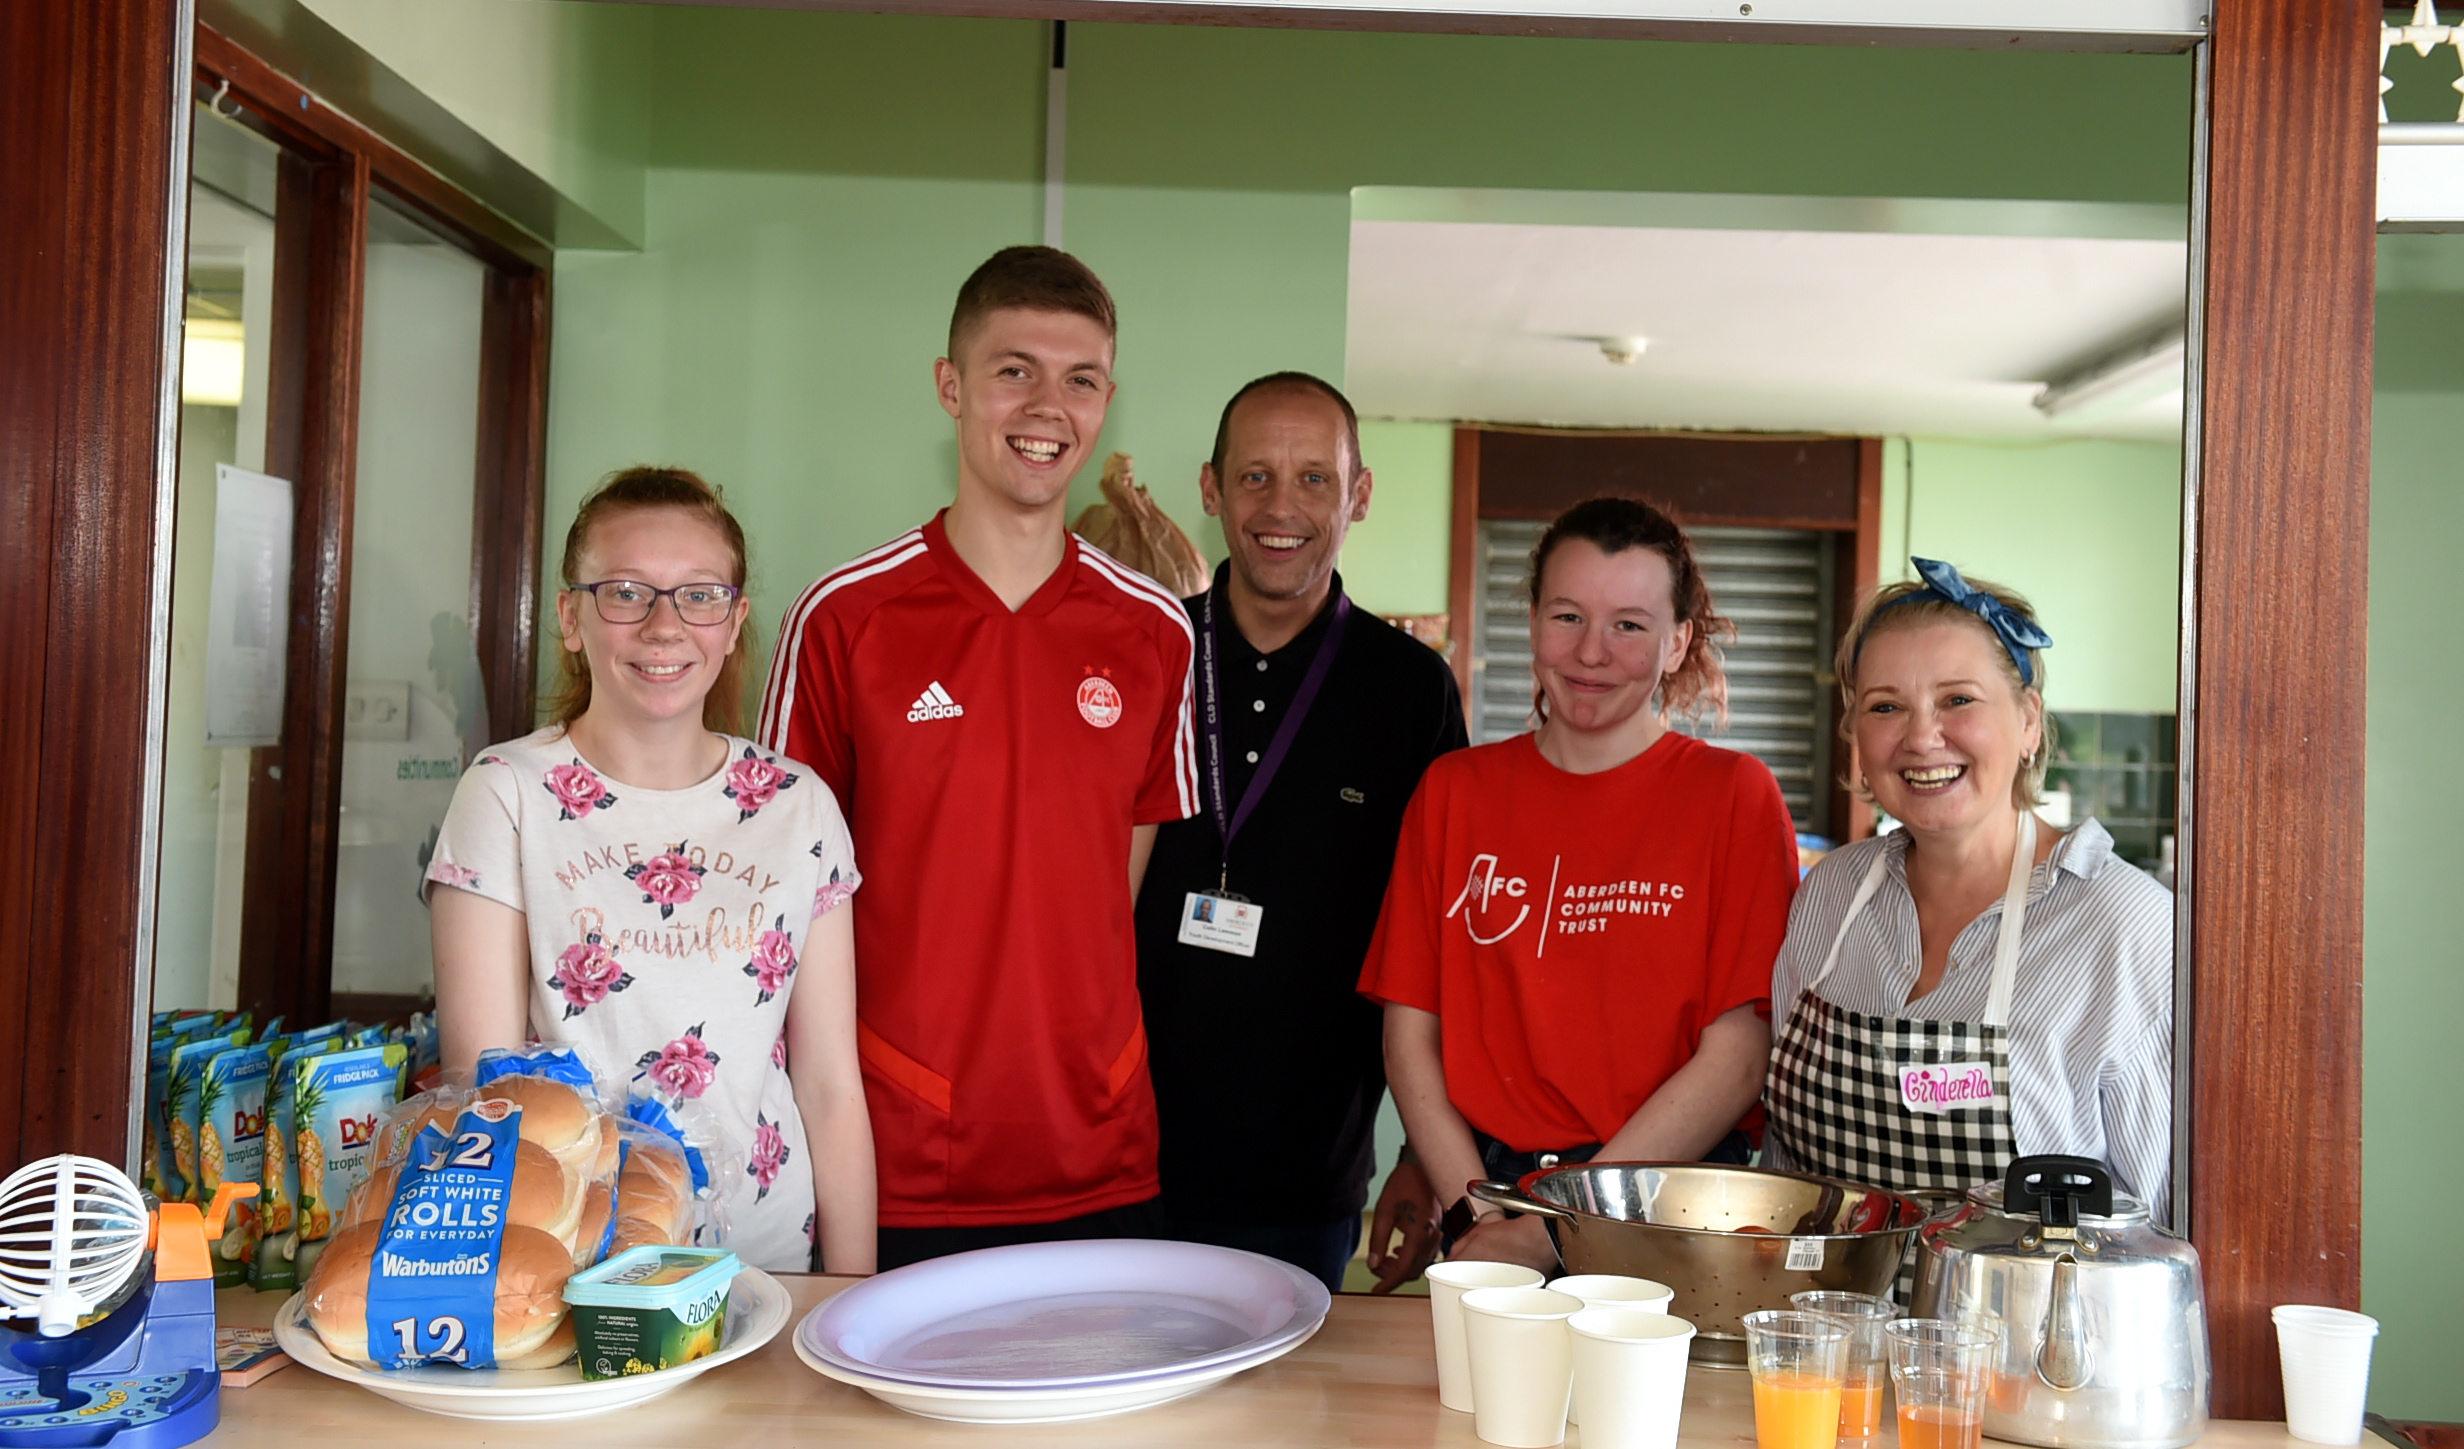 Cummings Park Centre hosts kids during the summer holidays for a Food and Fund scheme run by CFINE. 
The initiative is aimed to alleviate holiday hunger by supplying a range of food to school and community centres in the city